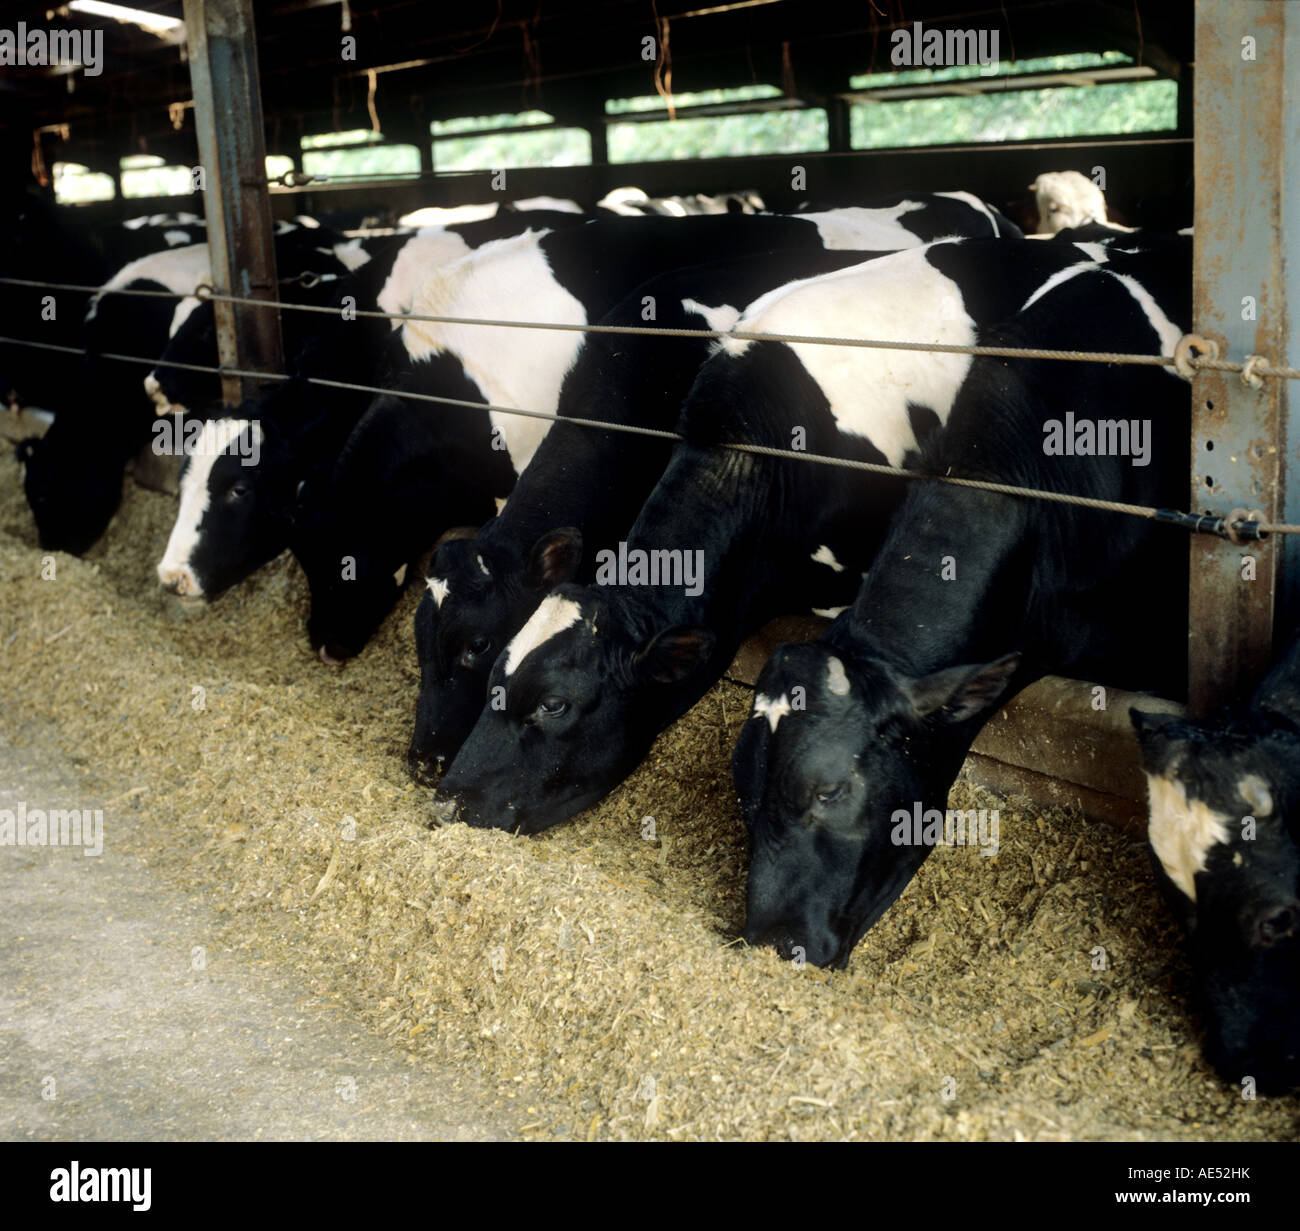 Holstein Friesian dairy cattle in stalls feeding on foraged maize Stock Photo